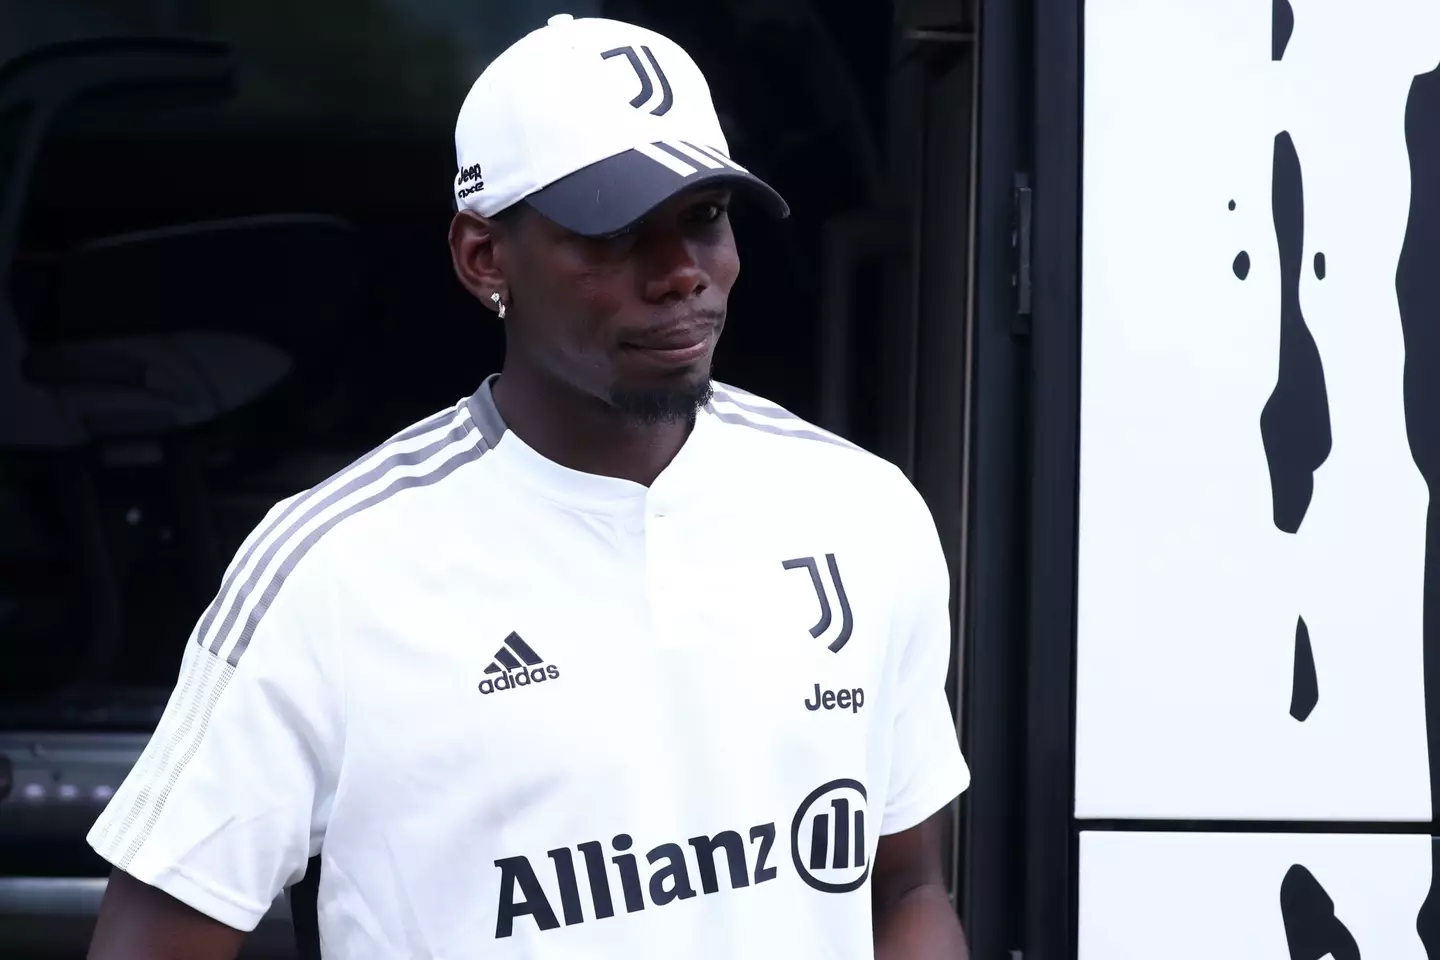 Pogba has reportedly been placed under police protection in Italy (Image: Alamy)